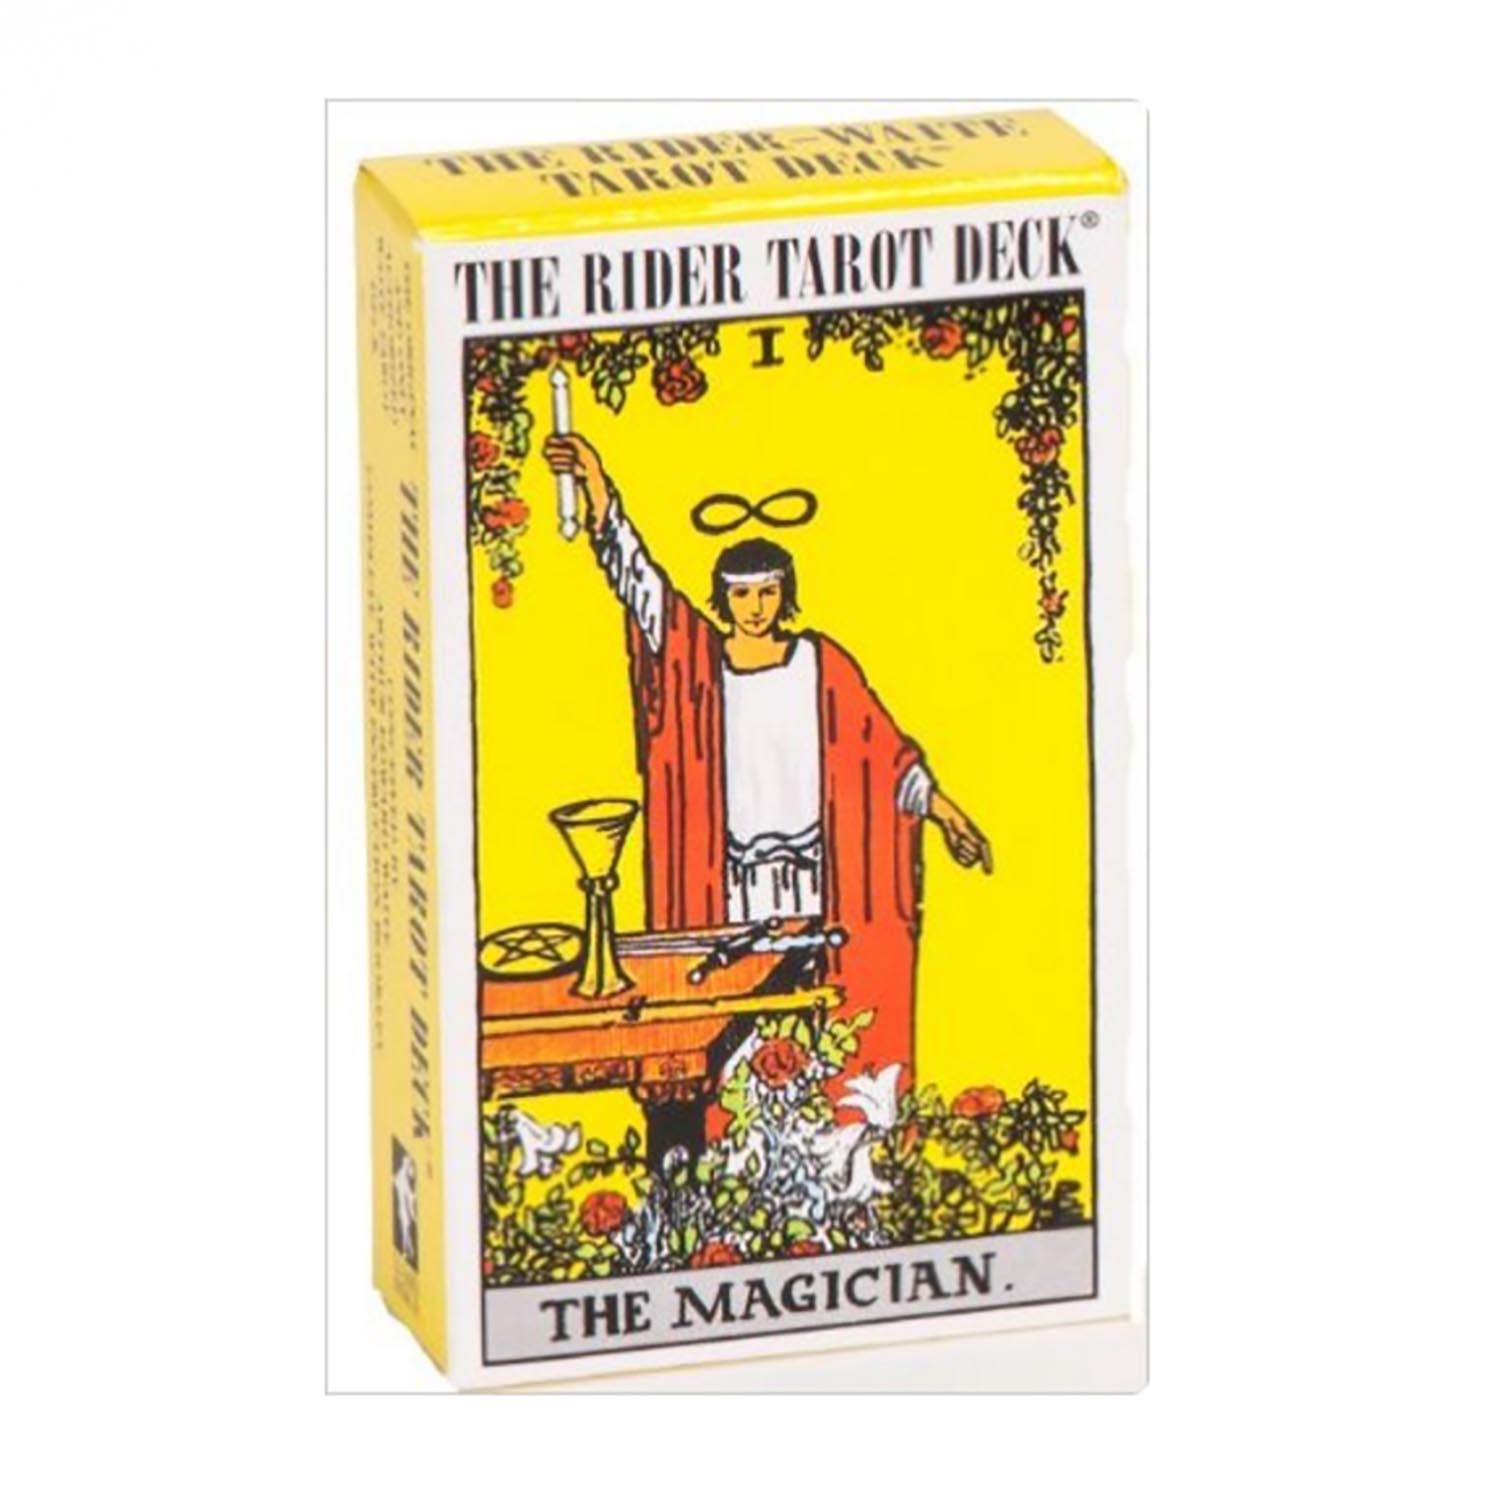 1. THE FUTURE IS HERE WITH TAROT DIVINATION DECK